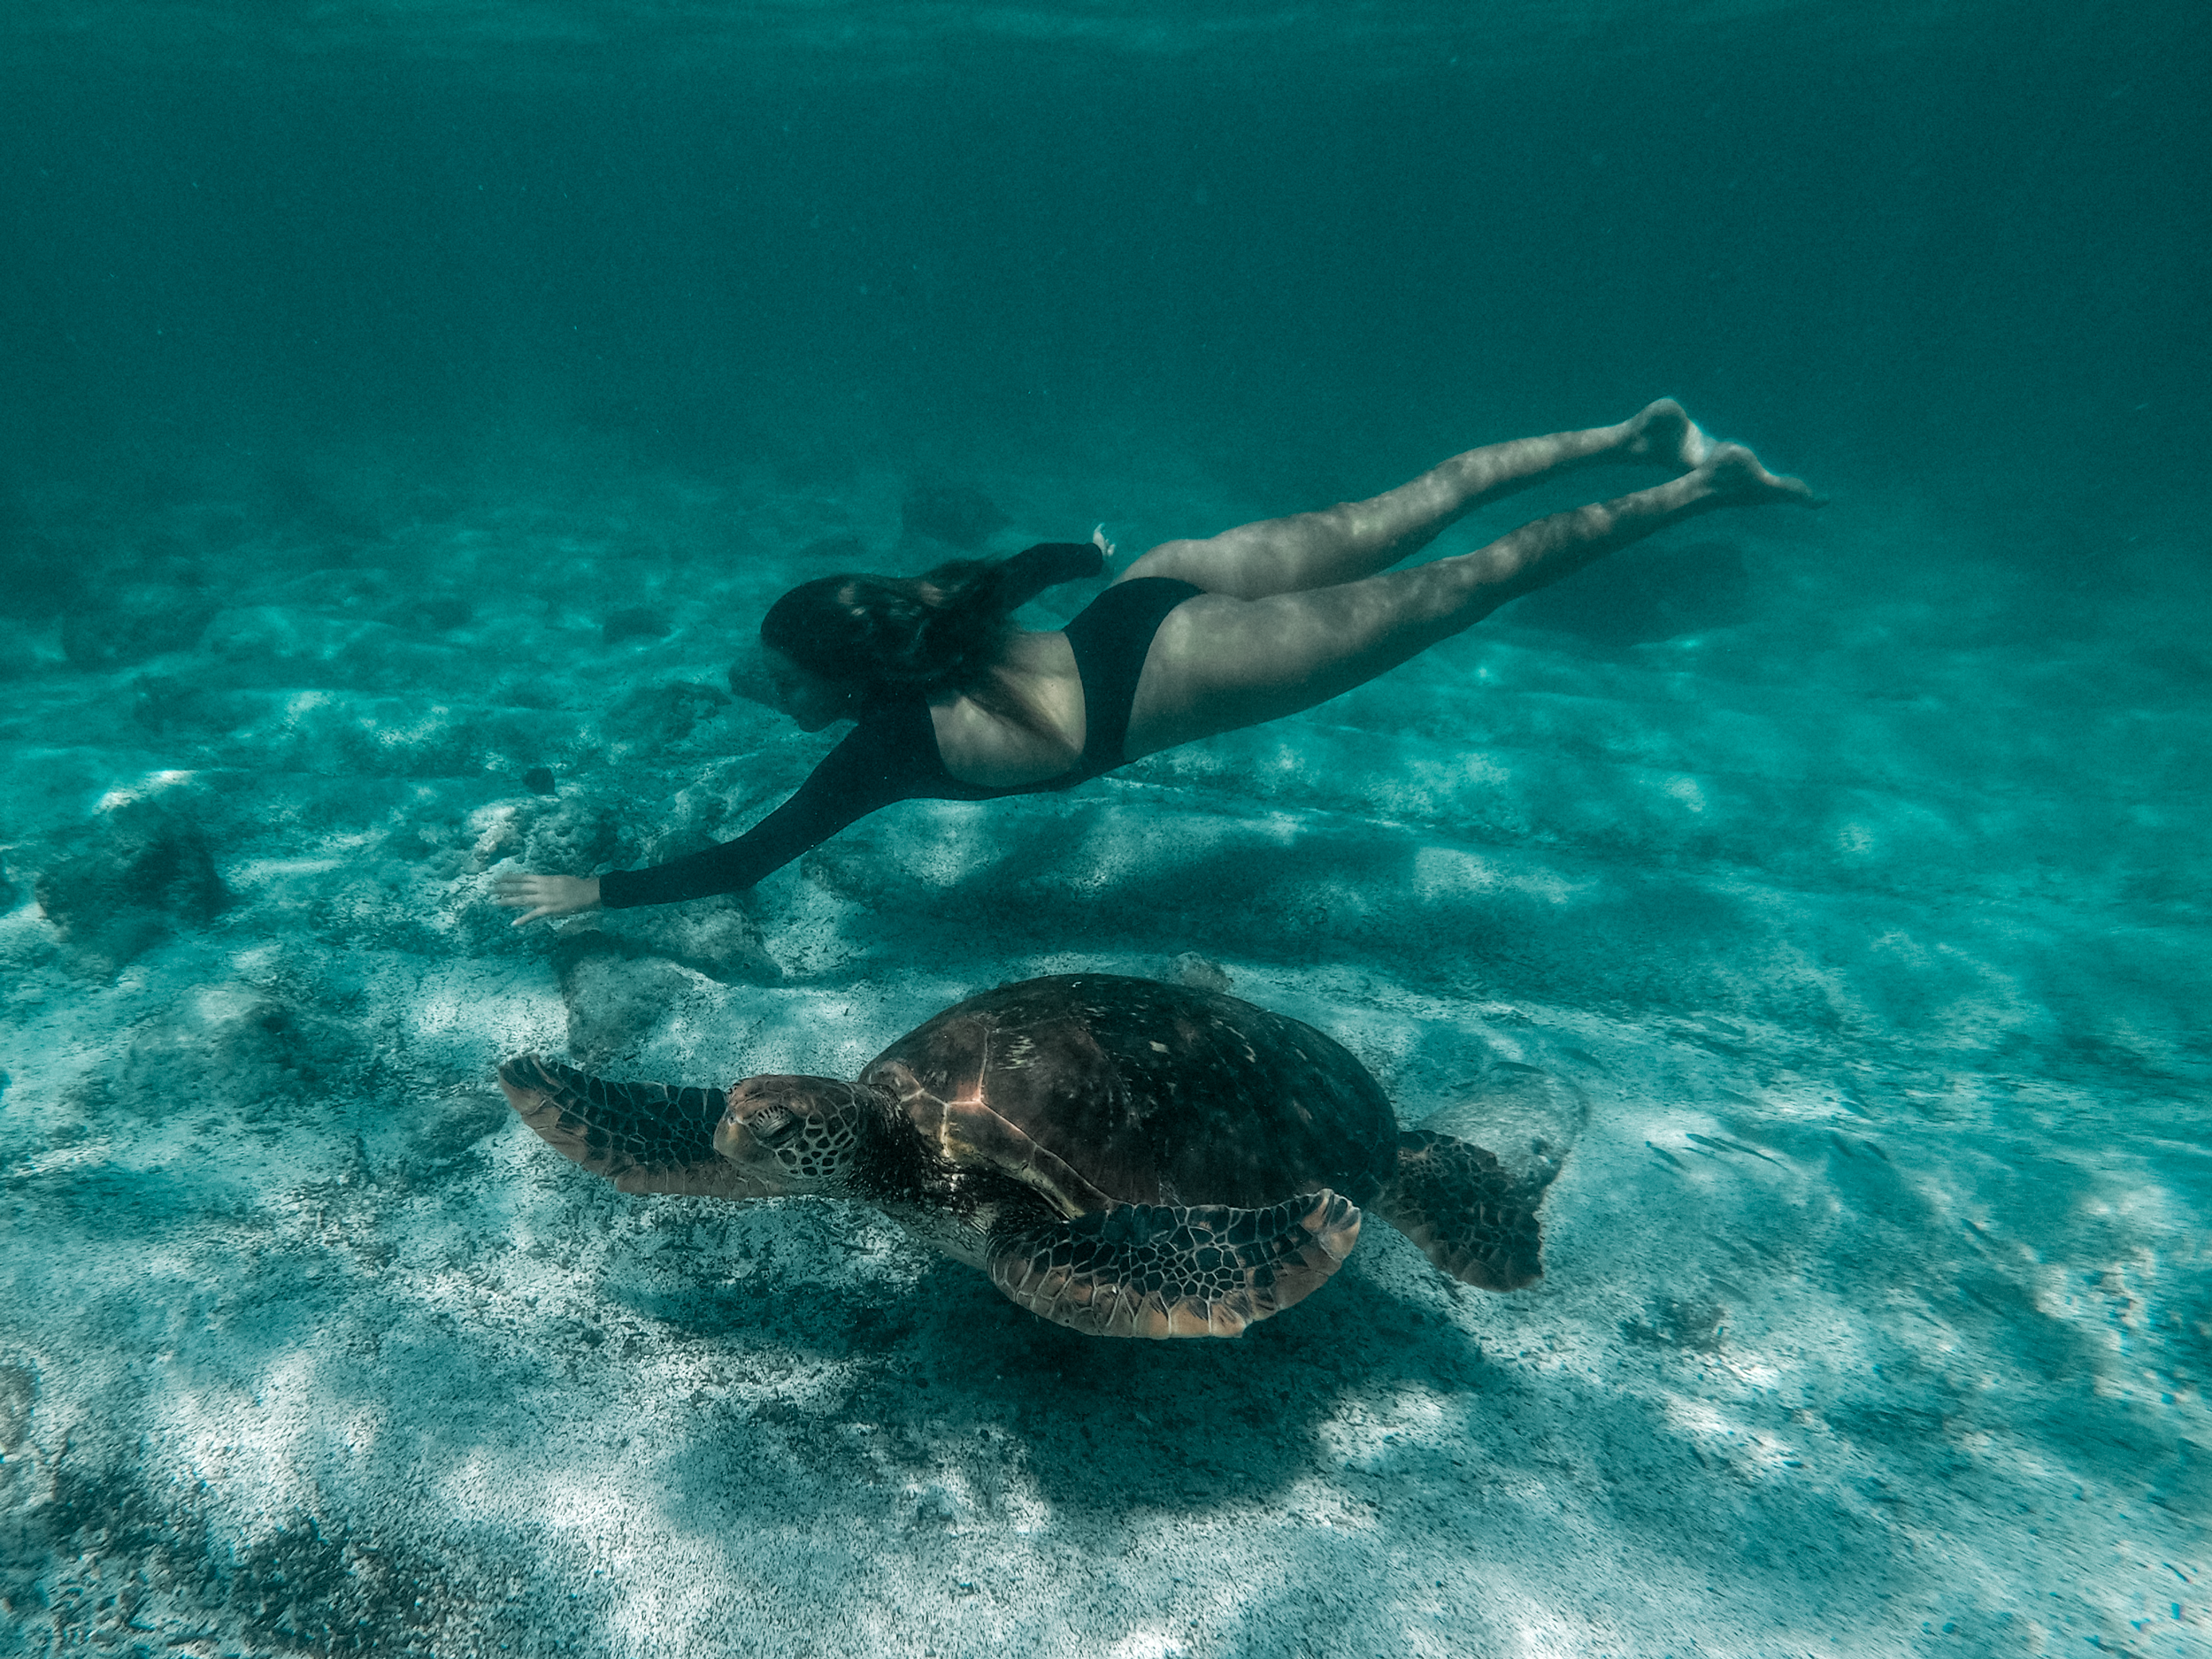 Surfer Pacha Light swimming with a Green Galapagos Turtle. Photography by Sebastien J. Zanella